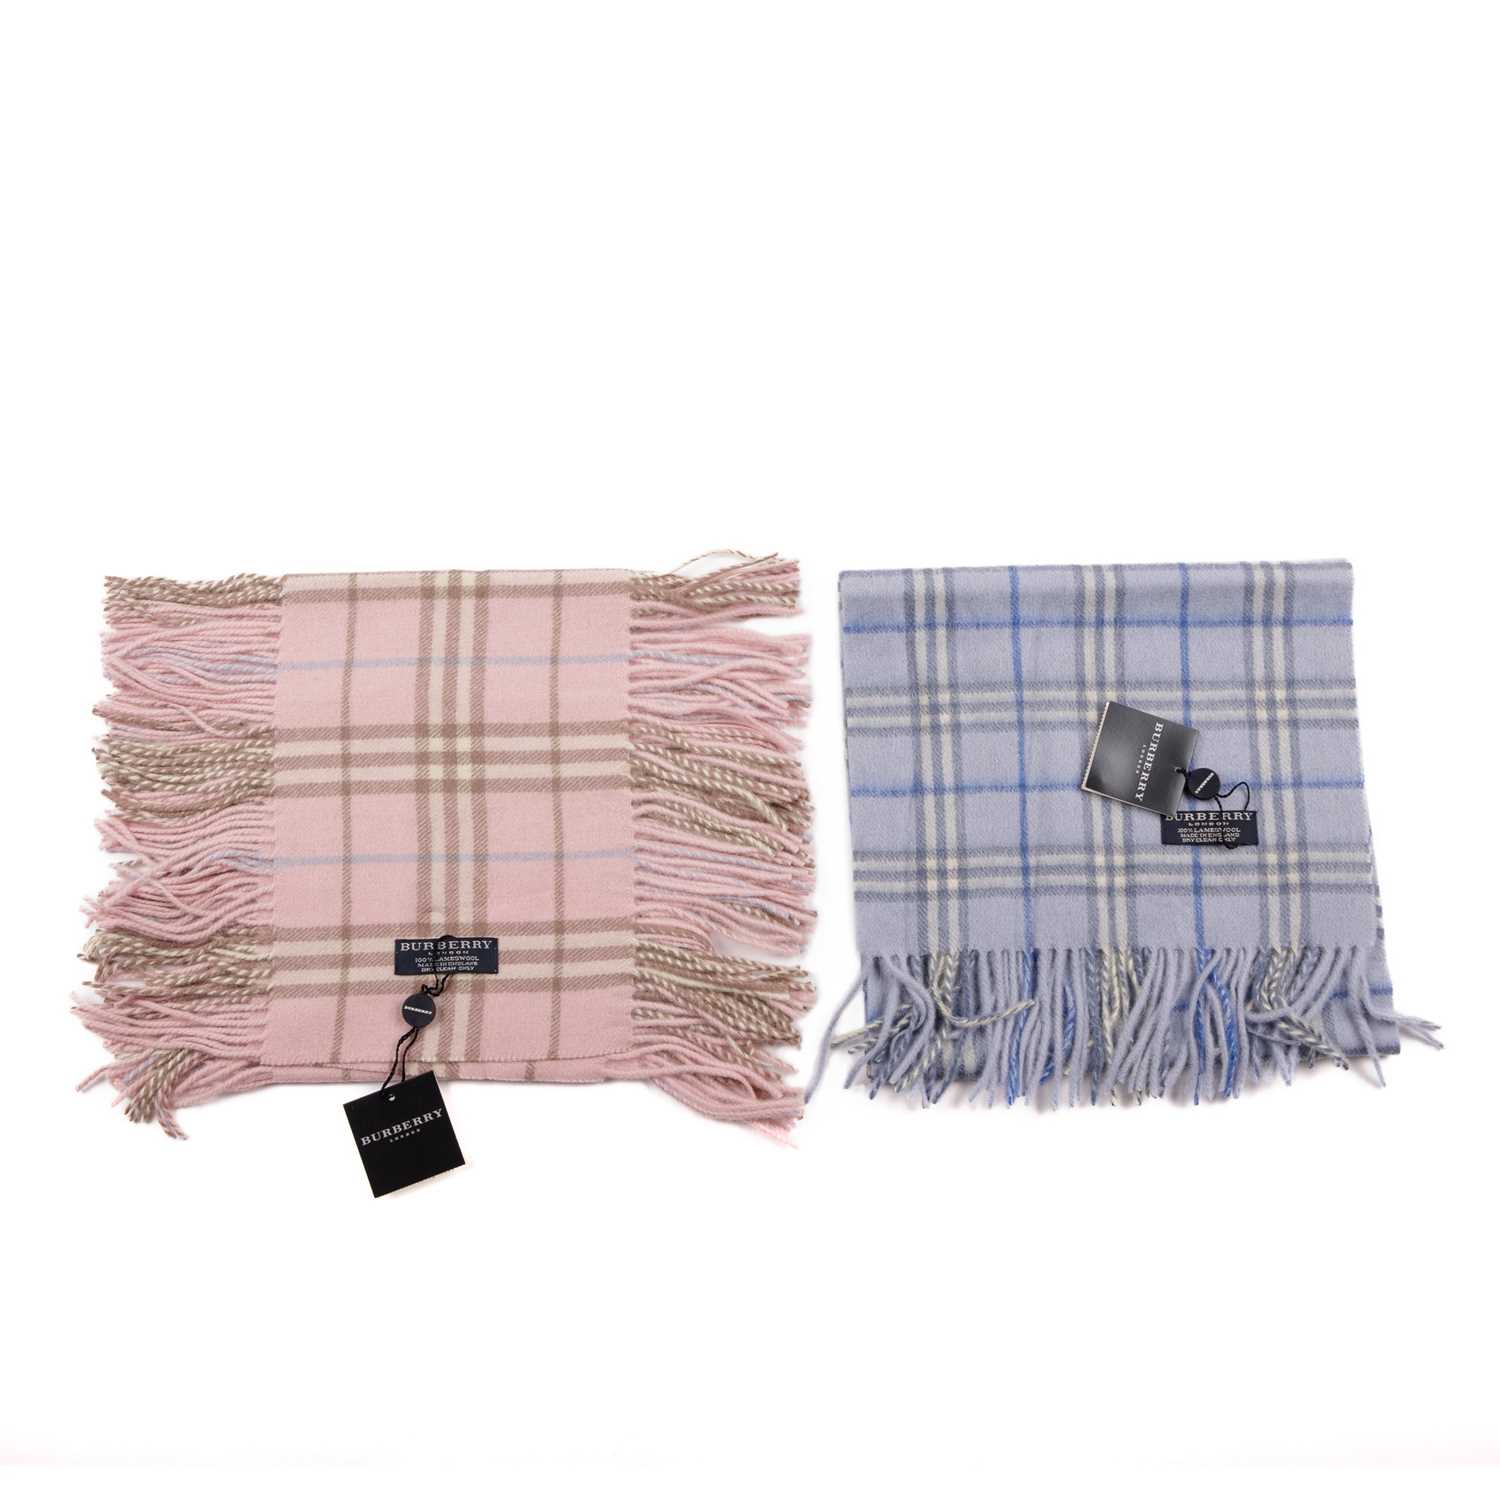 Burberry, two Nova Check lambswool scarves, to include a light blue scarf with fringe detailing at - Image 2 of 4